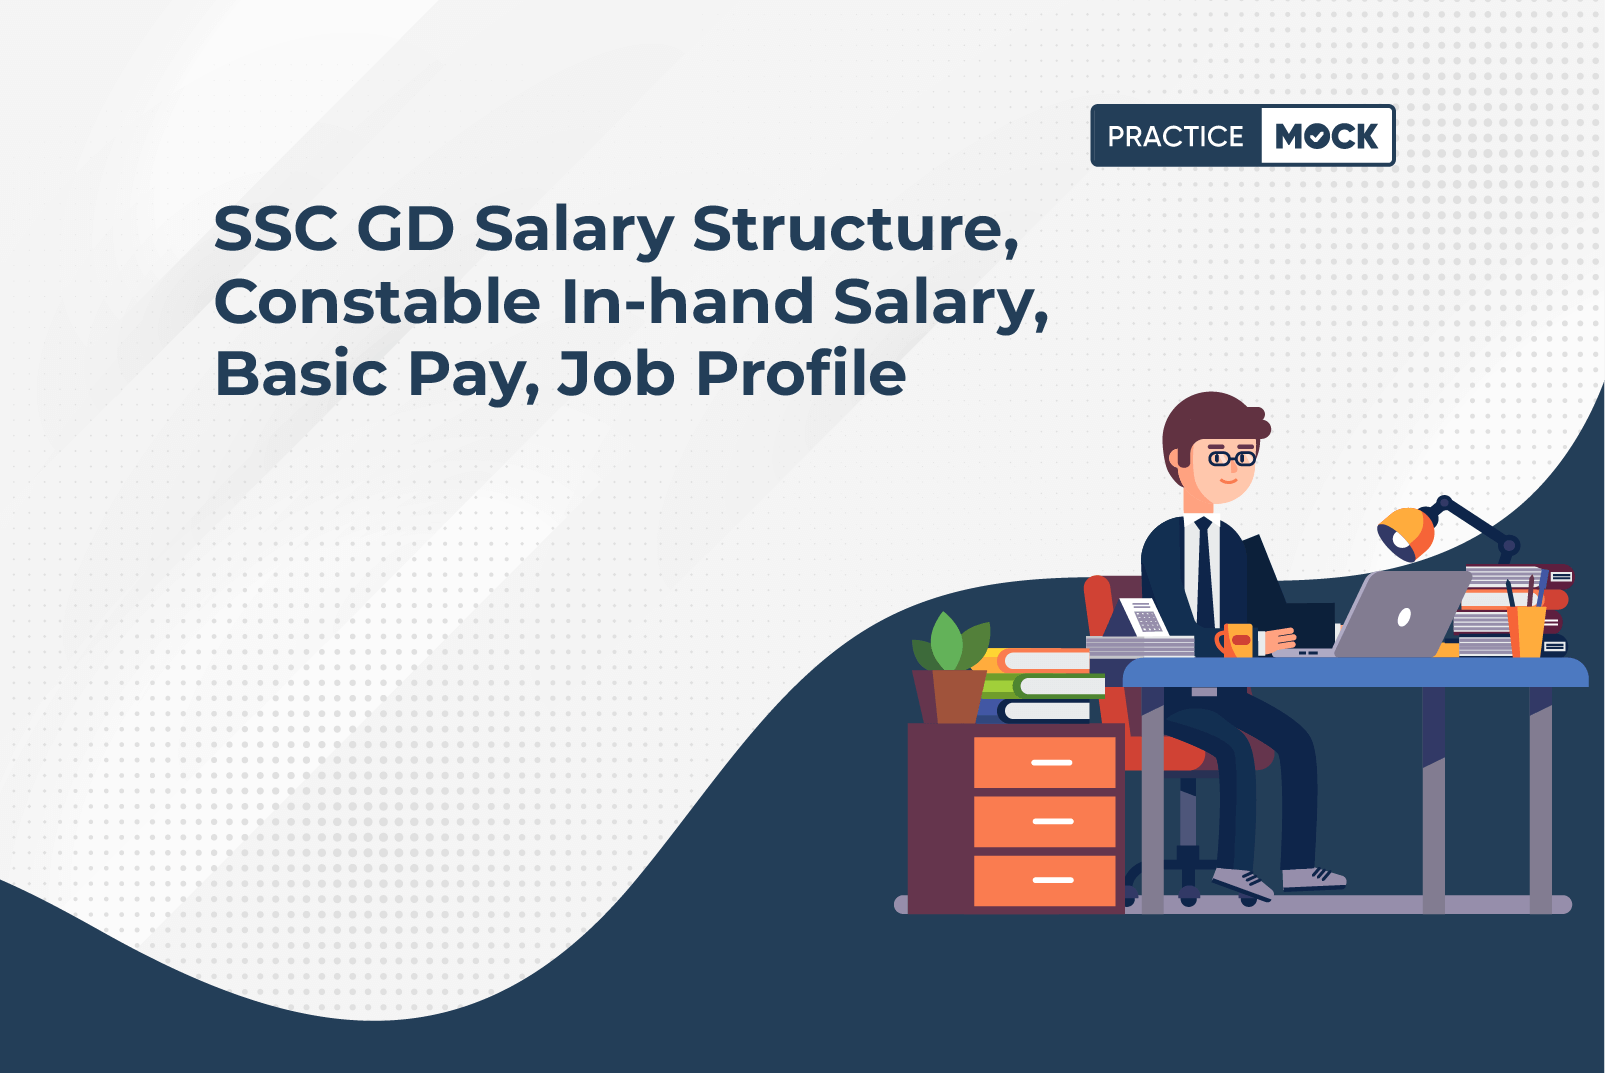 SSC GD Salary Structure, Constable In-hand Salary, Basic Pay, Job Profile (1)